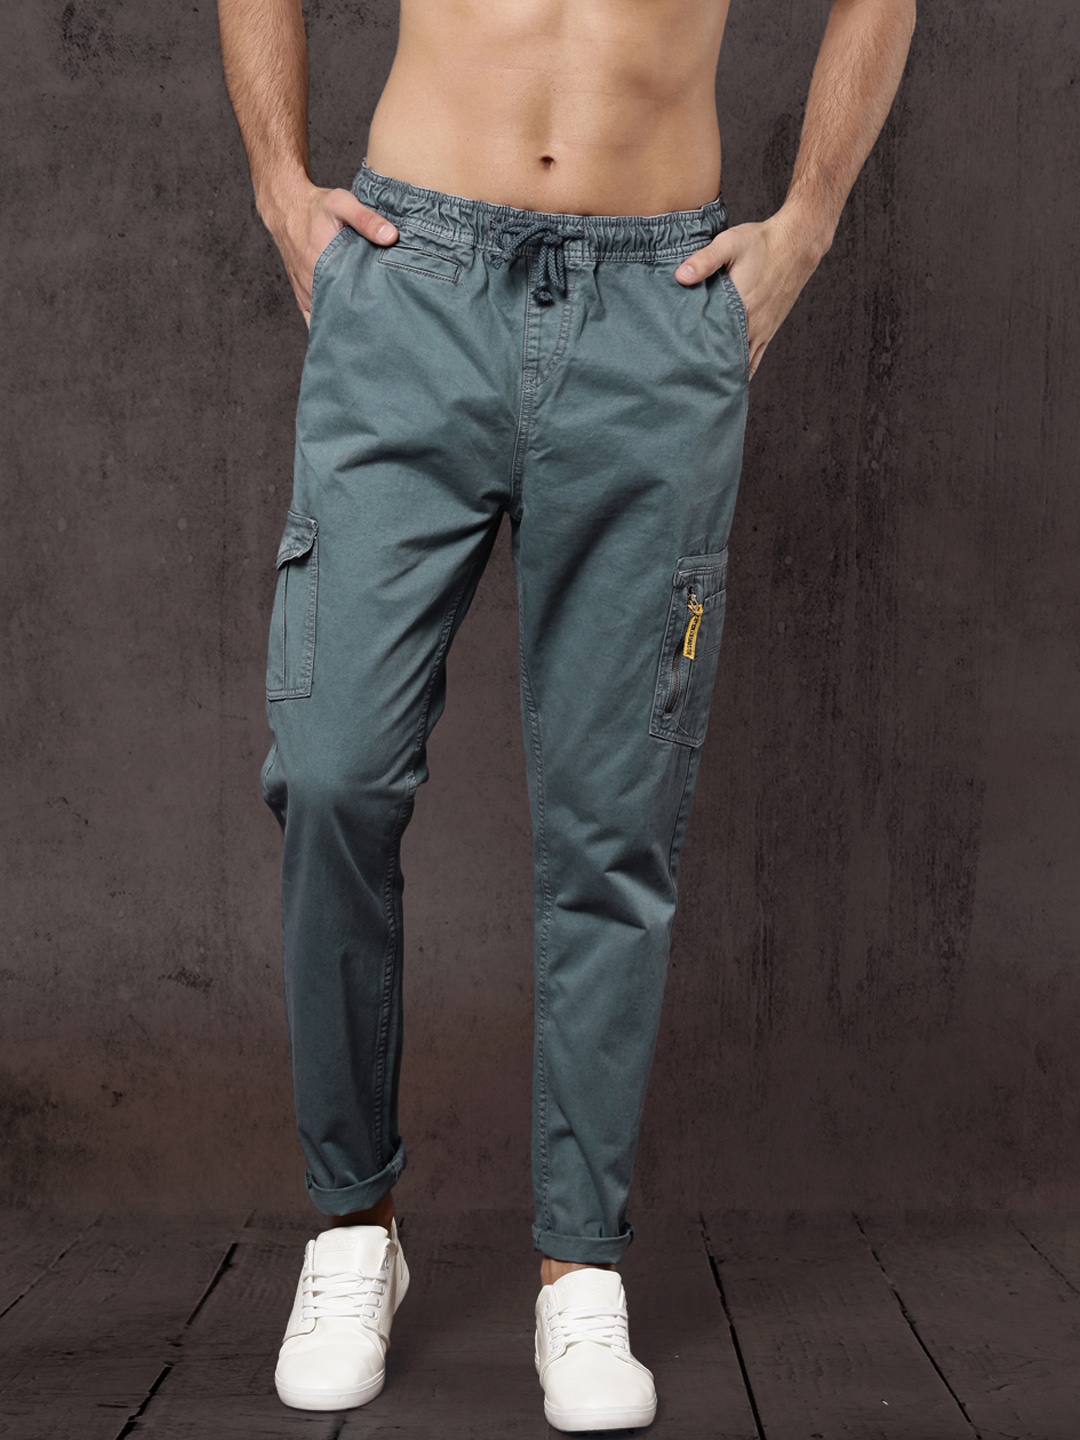 Myntra  Get Roadster Mens regular fit Solid Trousers Worth Rs 1299   Just Rs 339 Only  online best price India  cashback and coupons